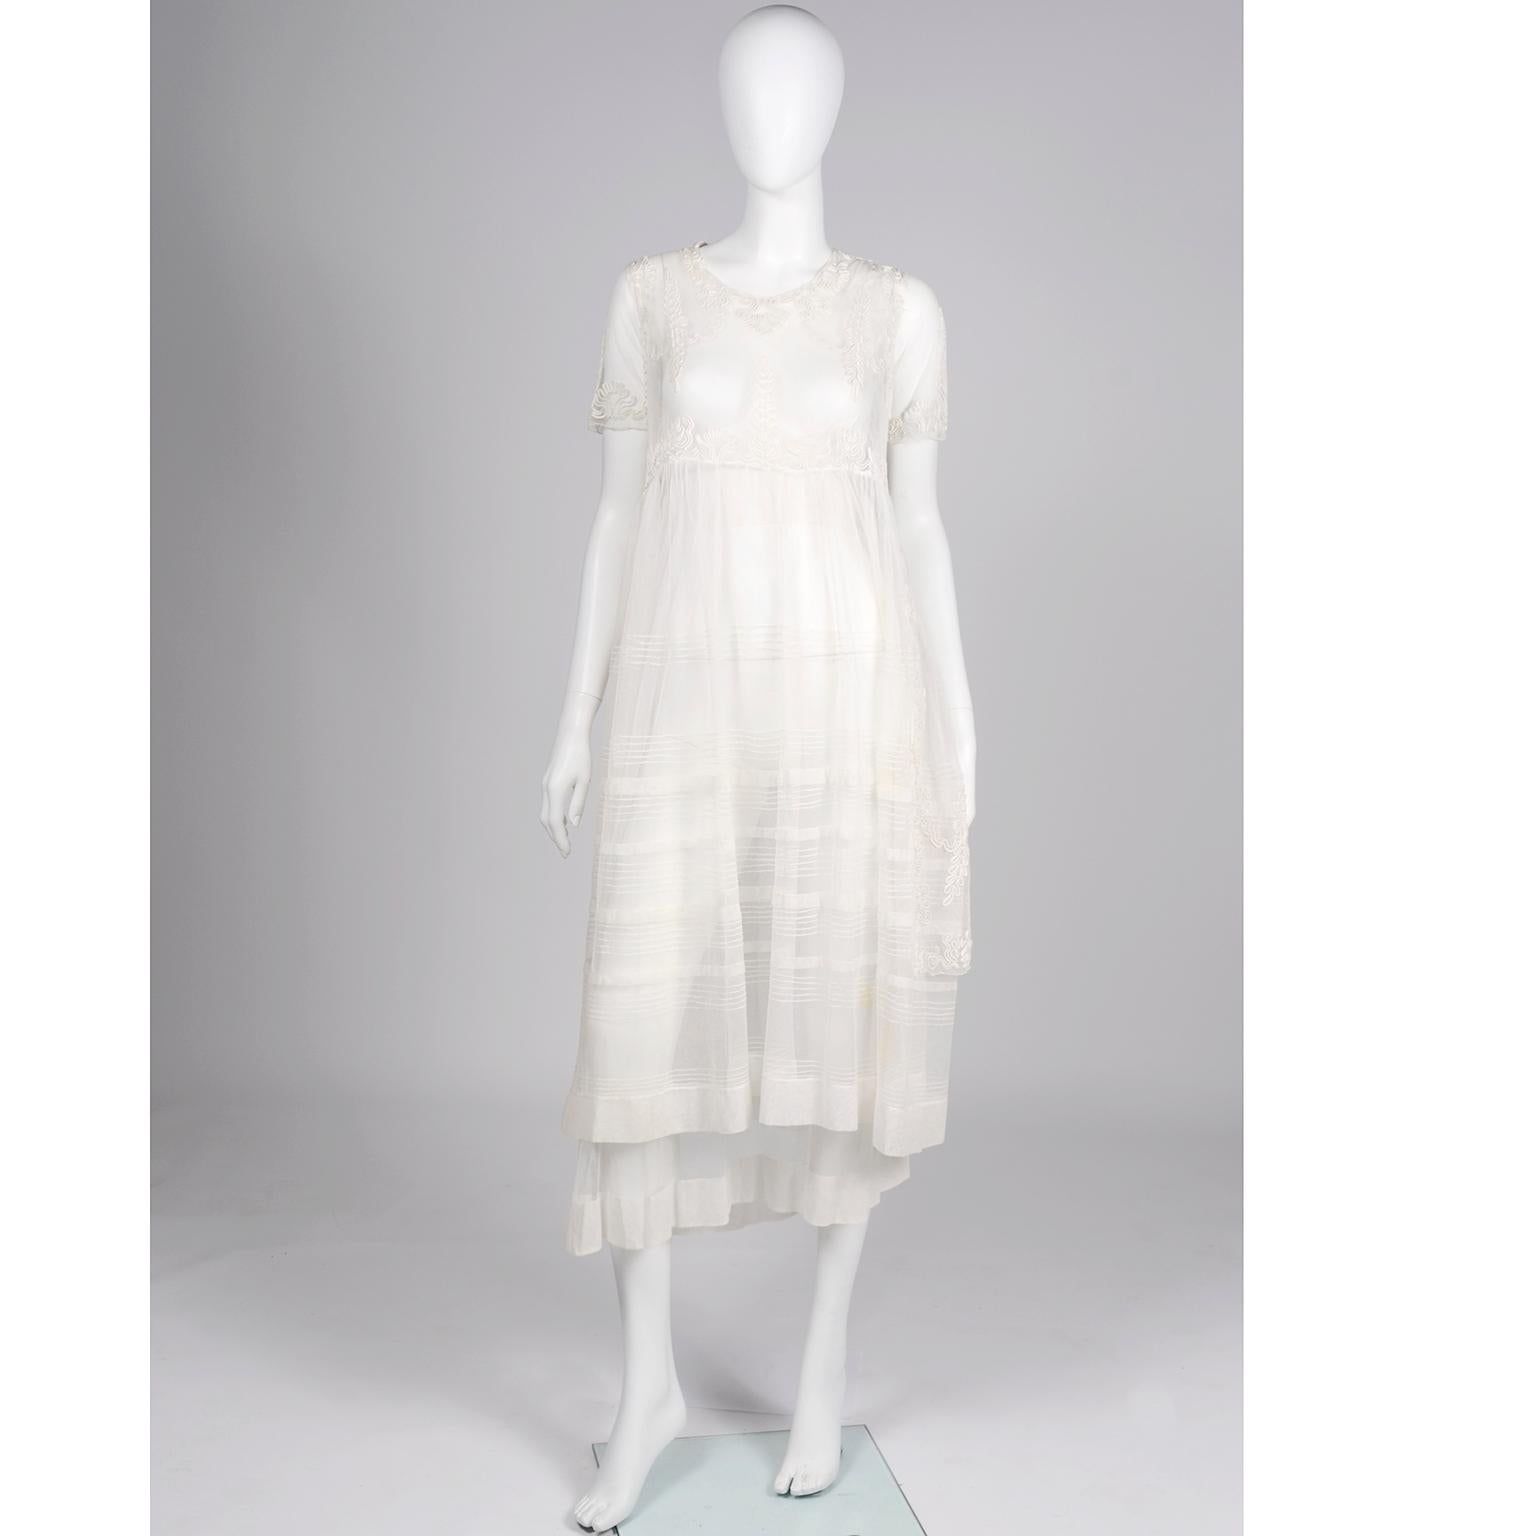 This is an incredible vintage dress from the 1910's!! The soutache detail is so well done and we especially love the pretty three layers of soft netting . The base layer is solid with a with a thick tulle hemline and waistband. The top layer is a